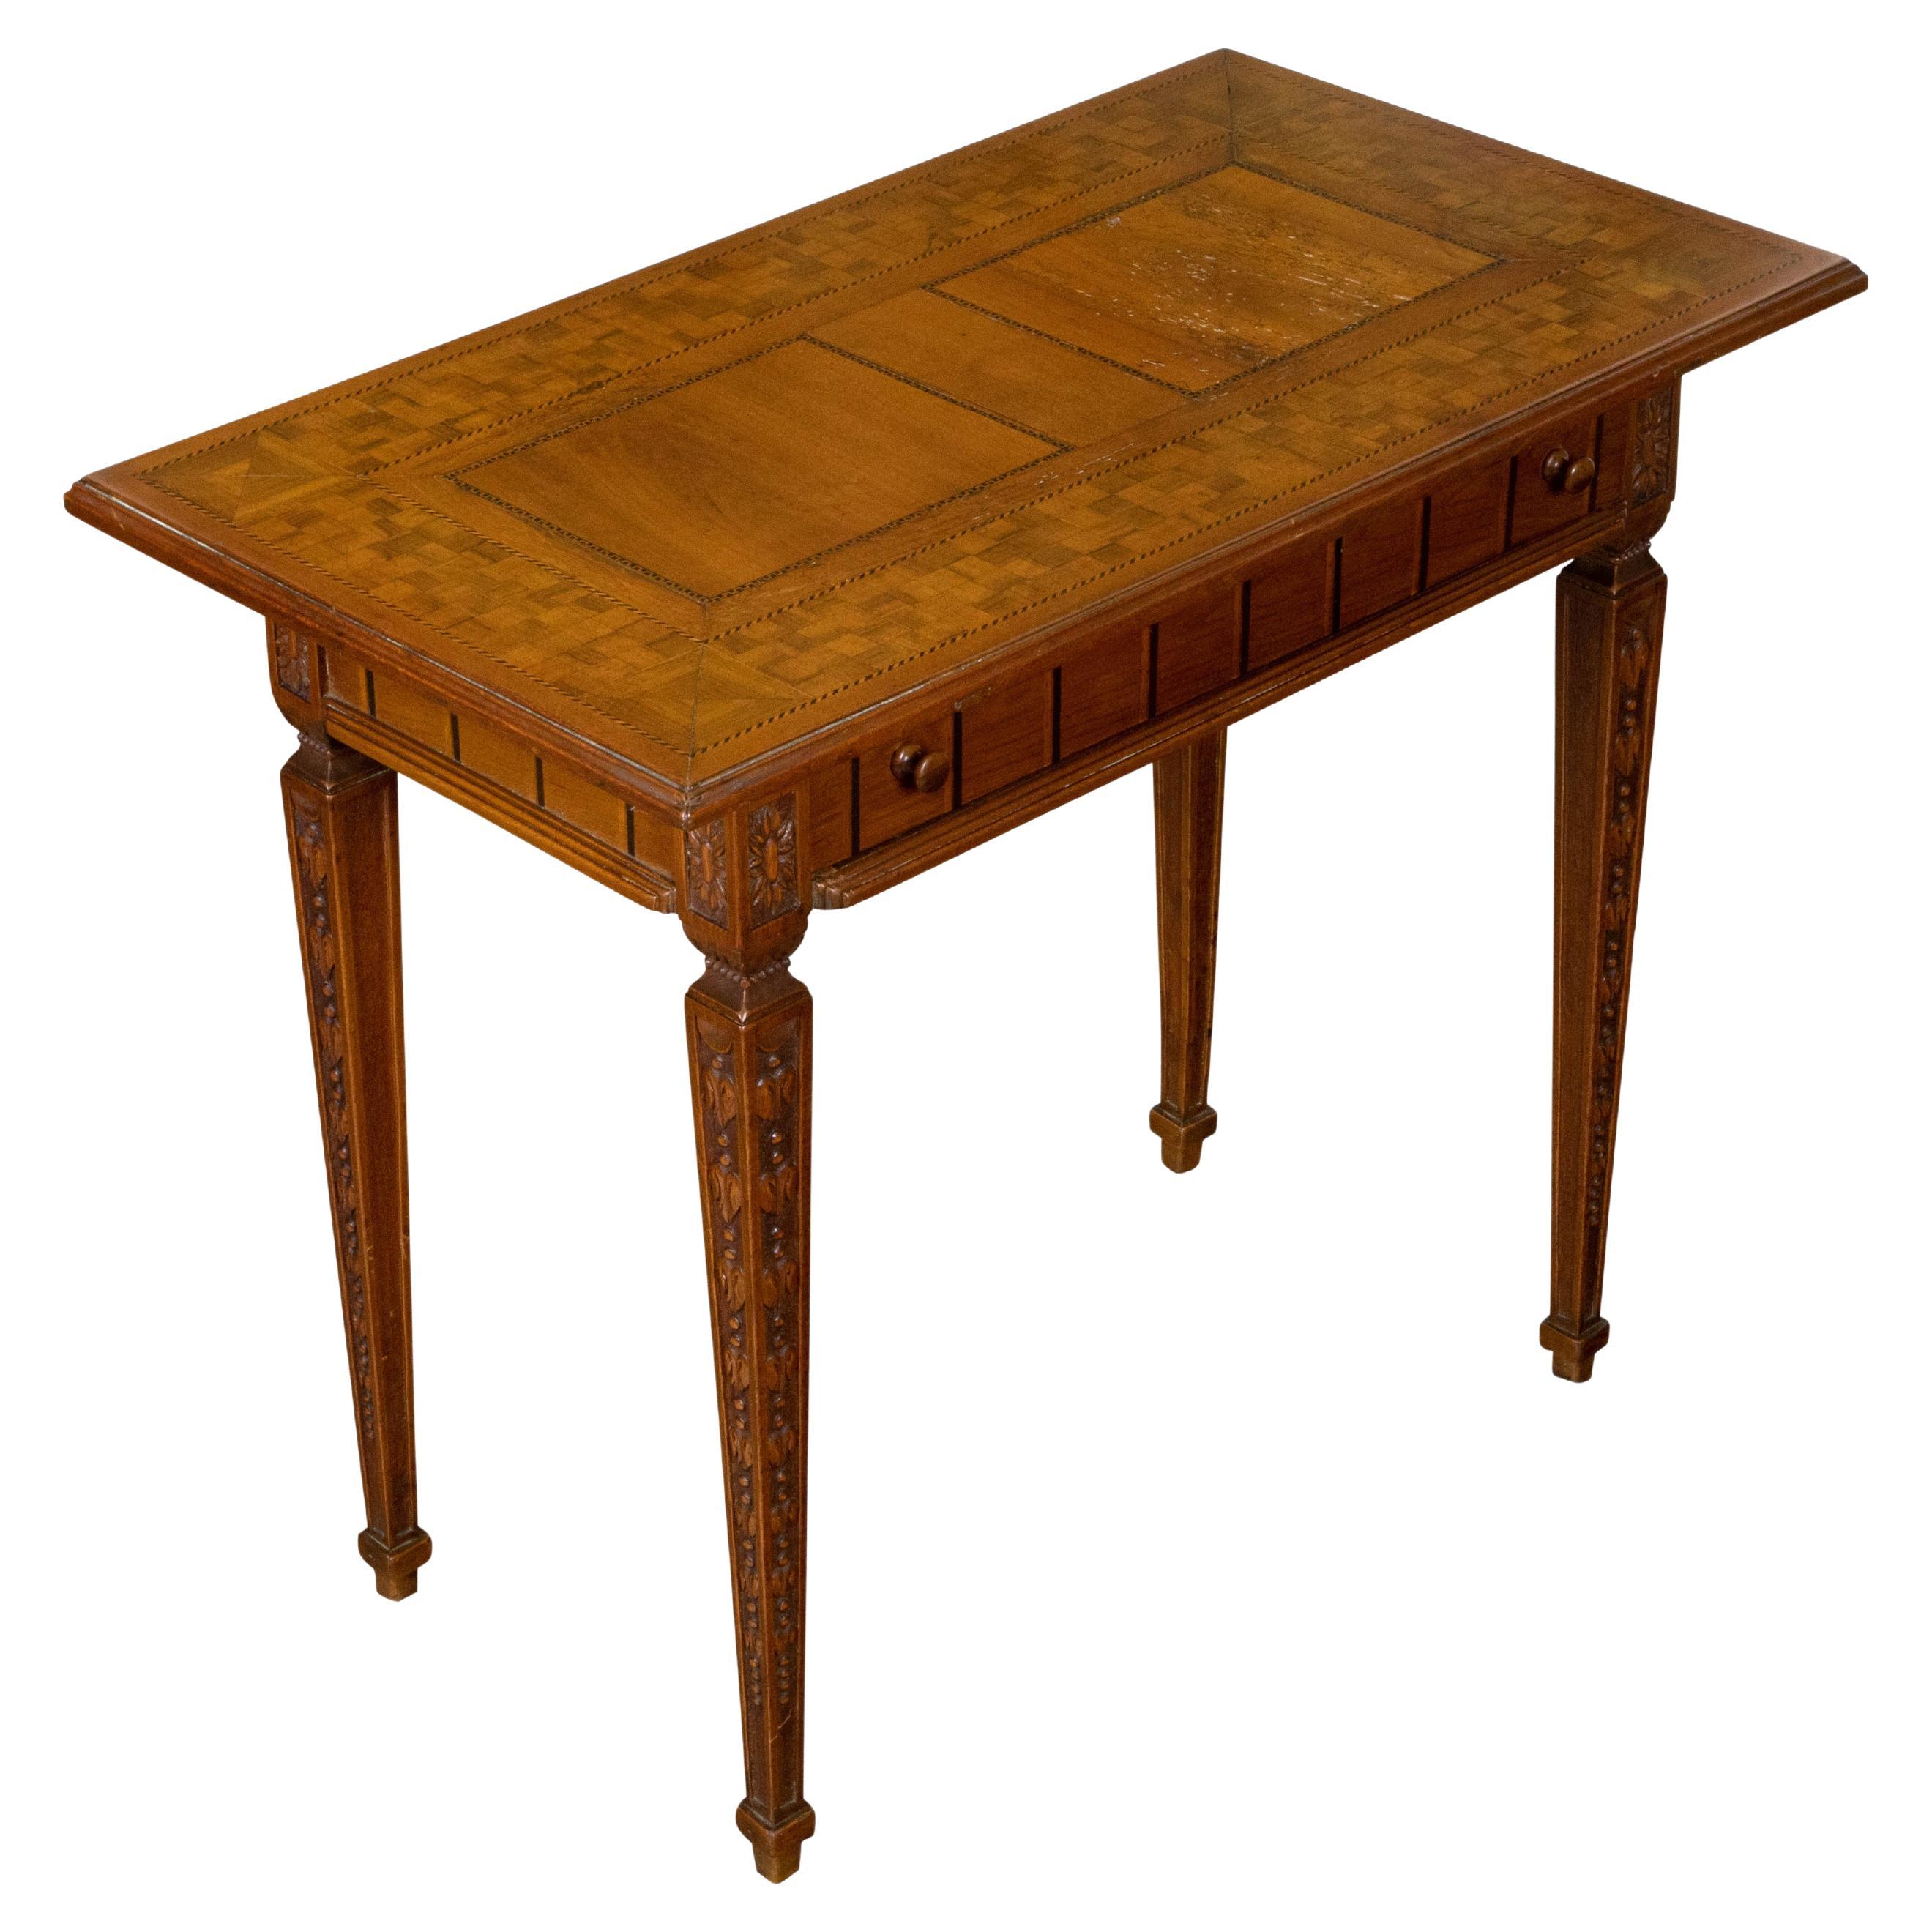 French Napoléon III Period Walnut Side Table with Inlaid Décor and Single Drawer For Sale